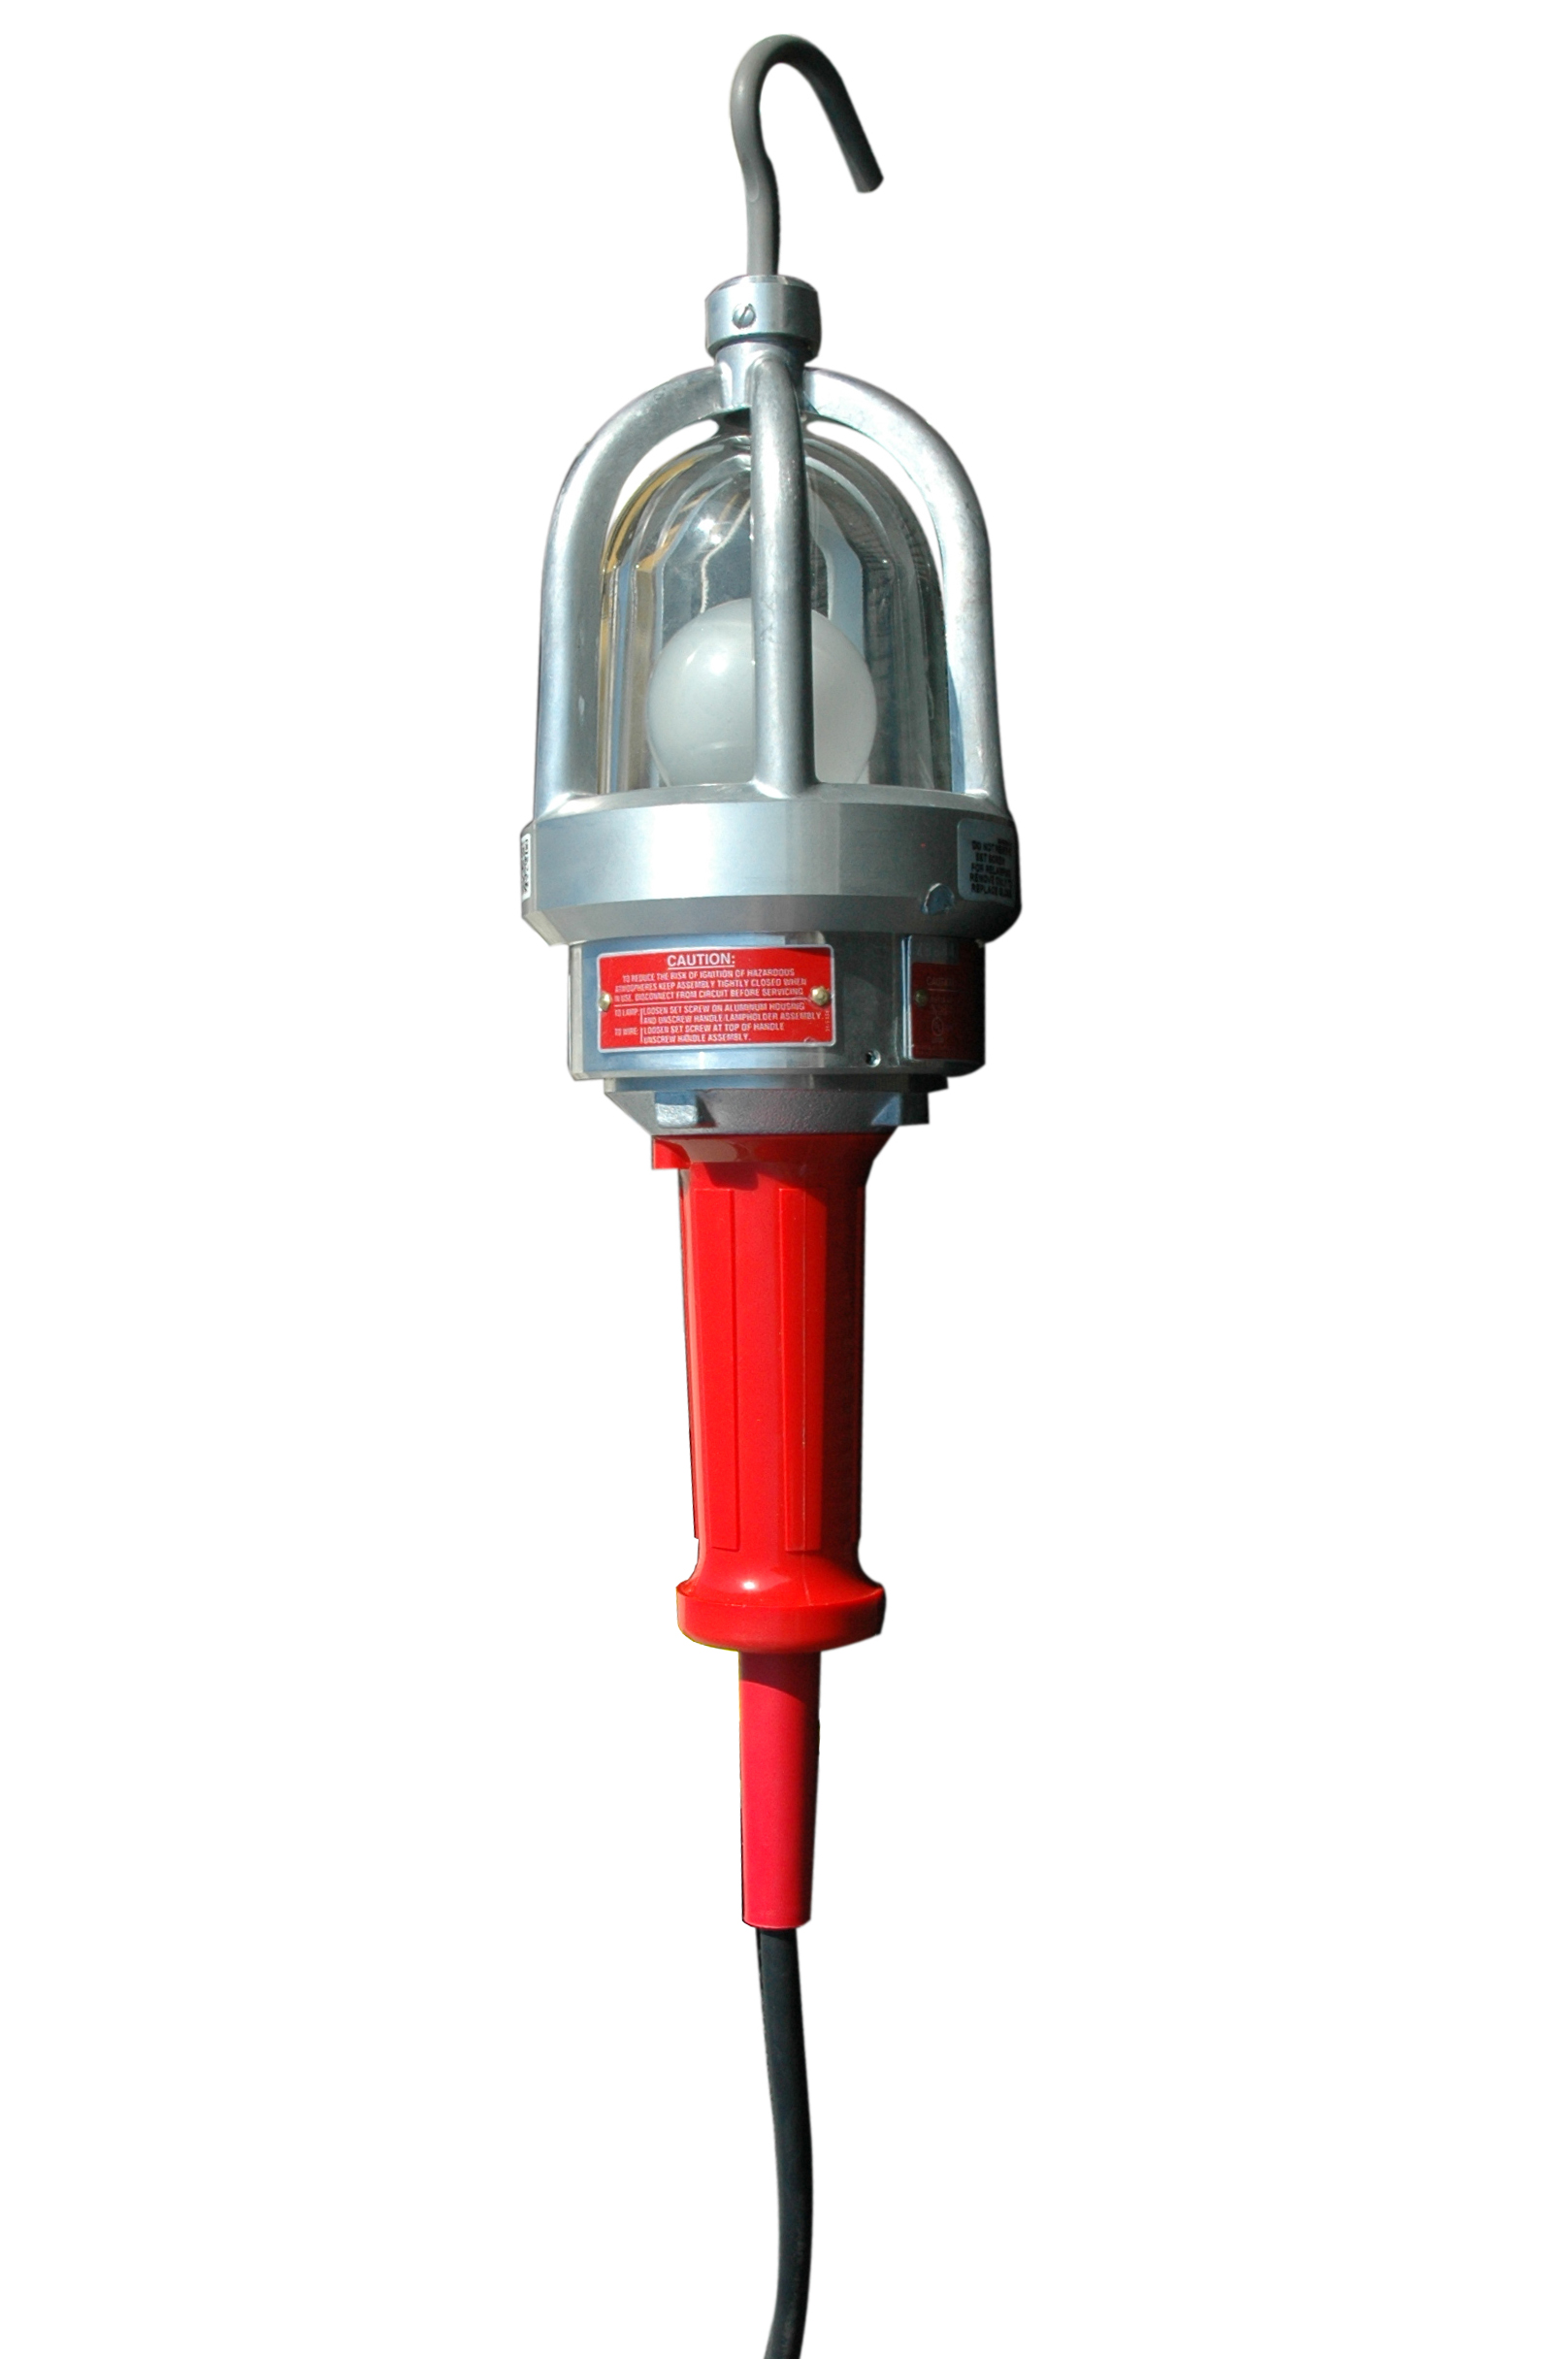 EHL-LED-7W-100-1523 explosion proof LED drop light from Larson Electronics